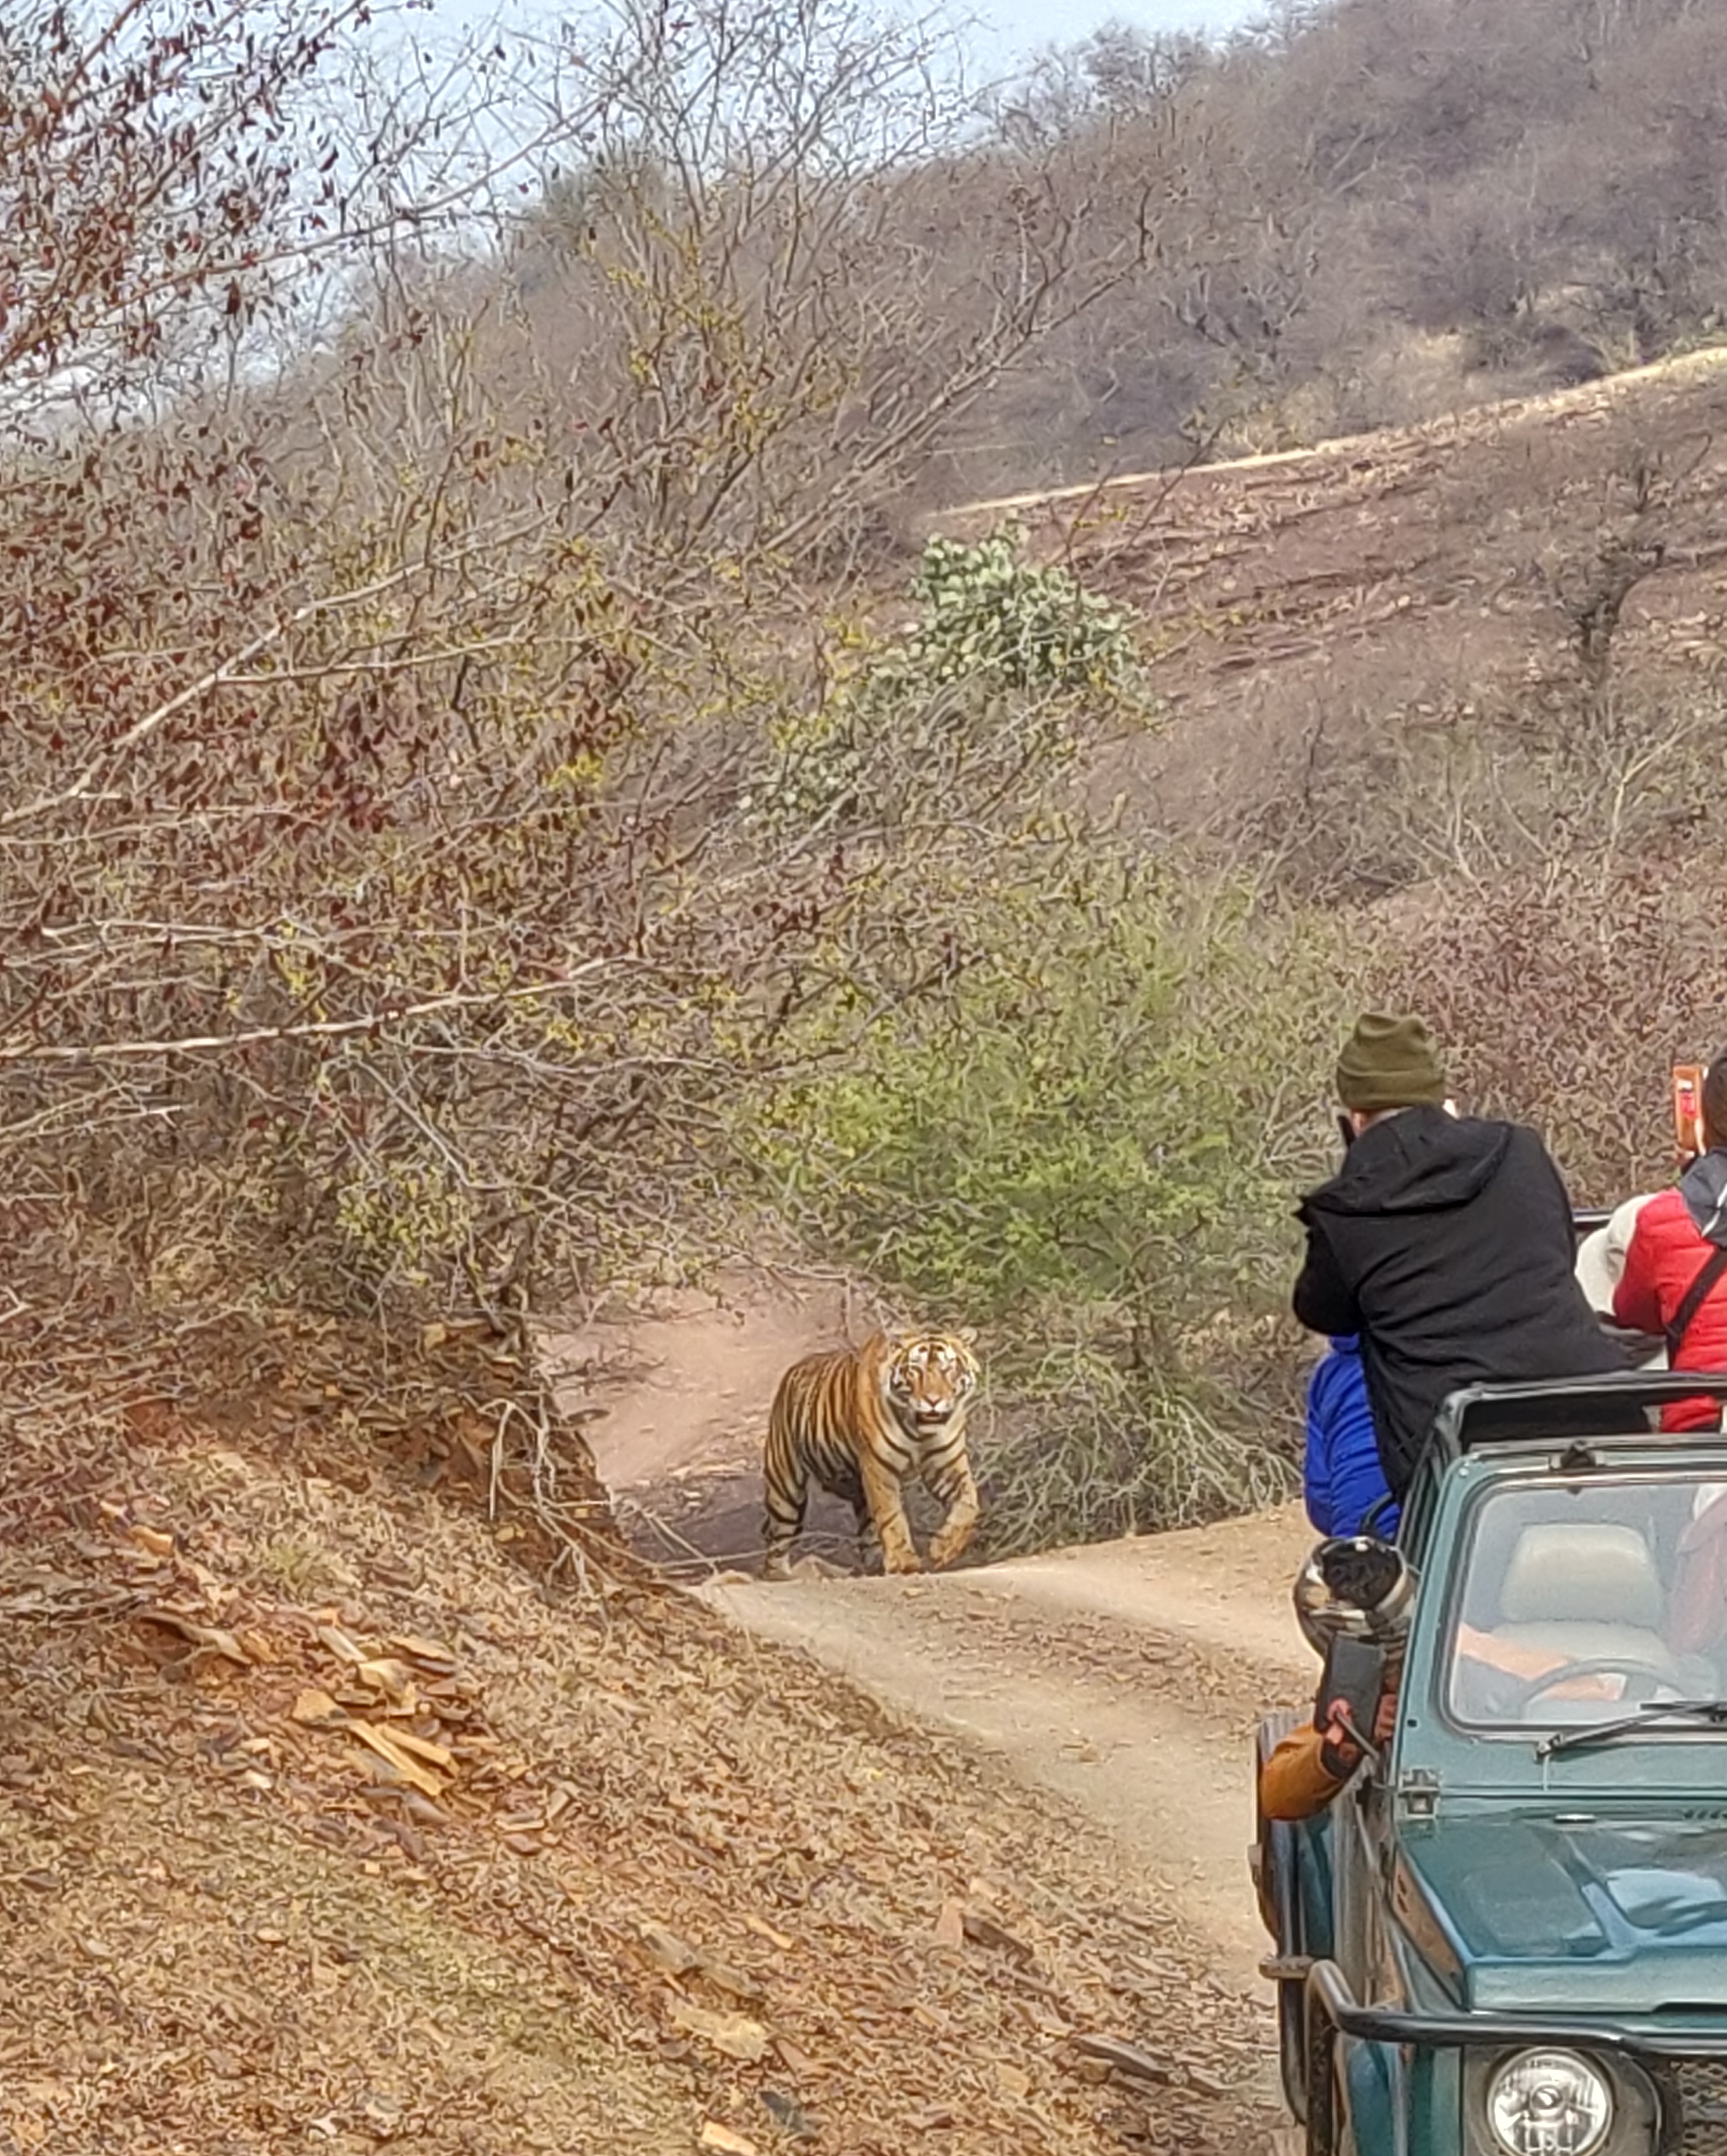 How to spot a tiger in Ranthambore